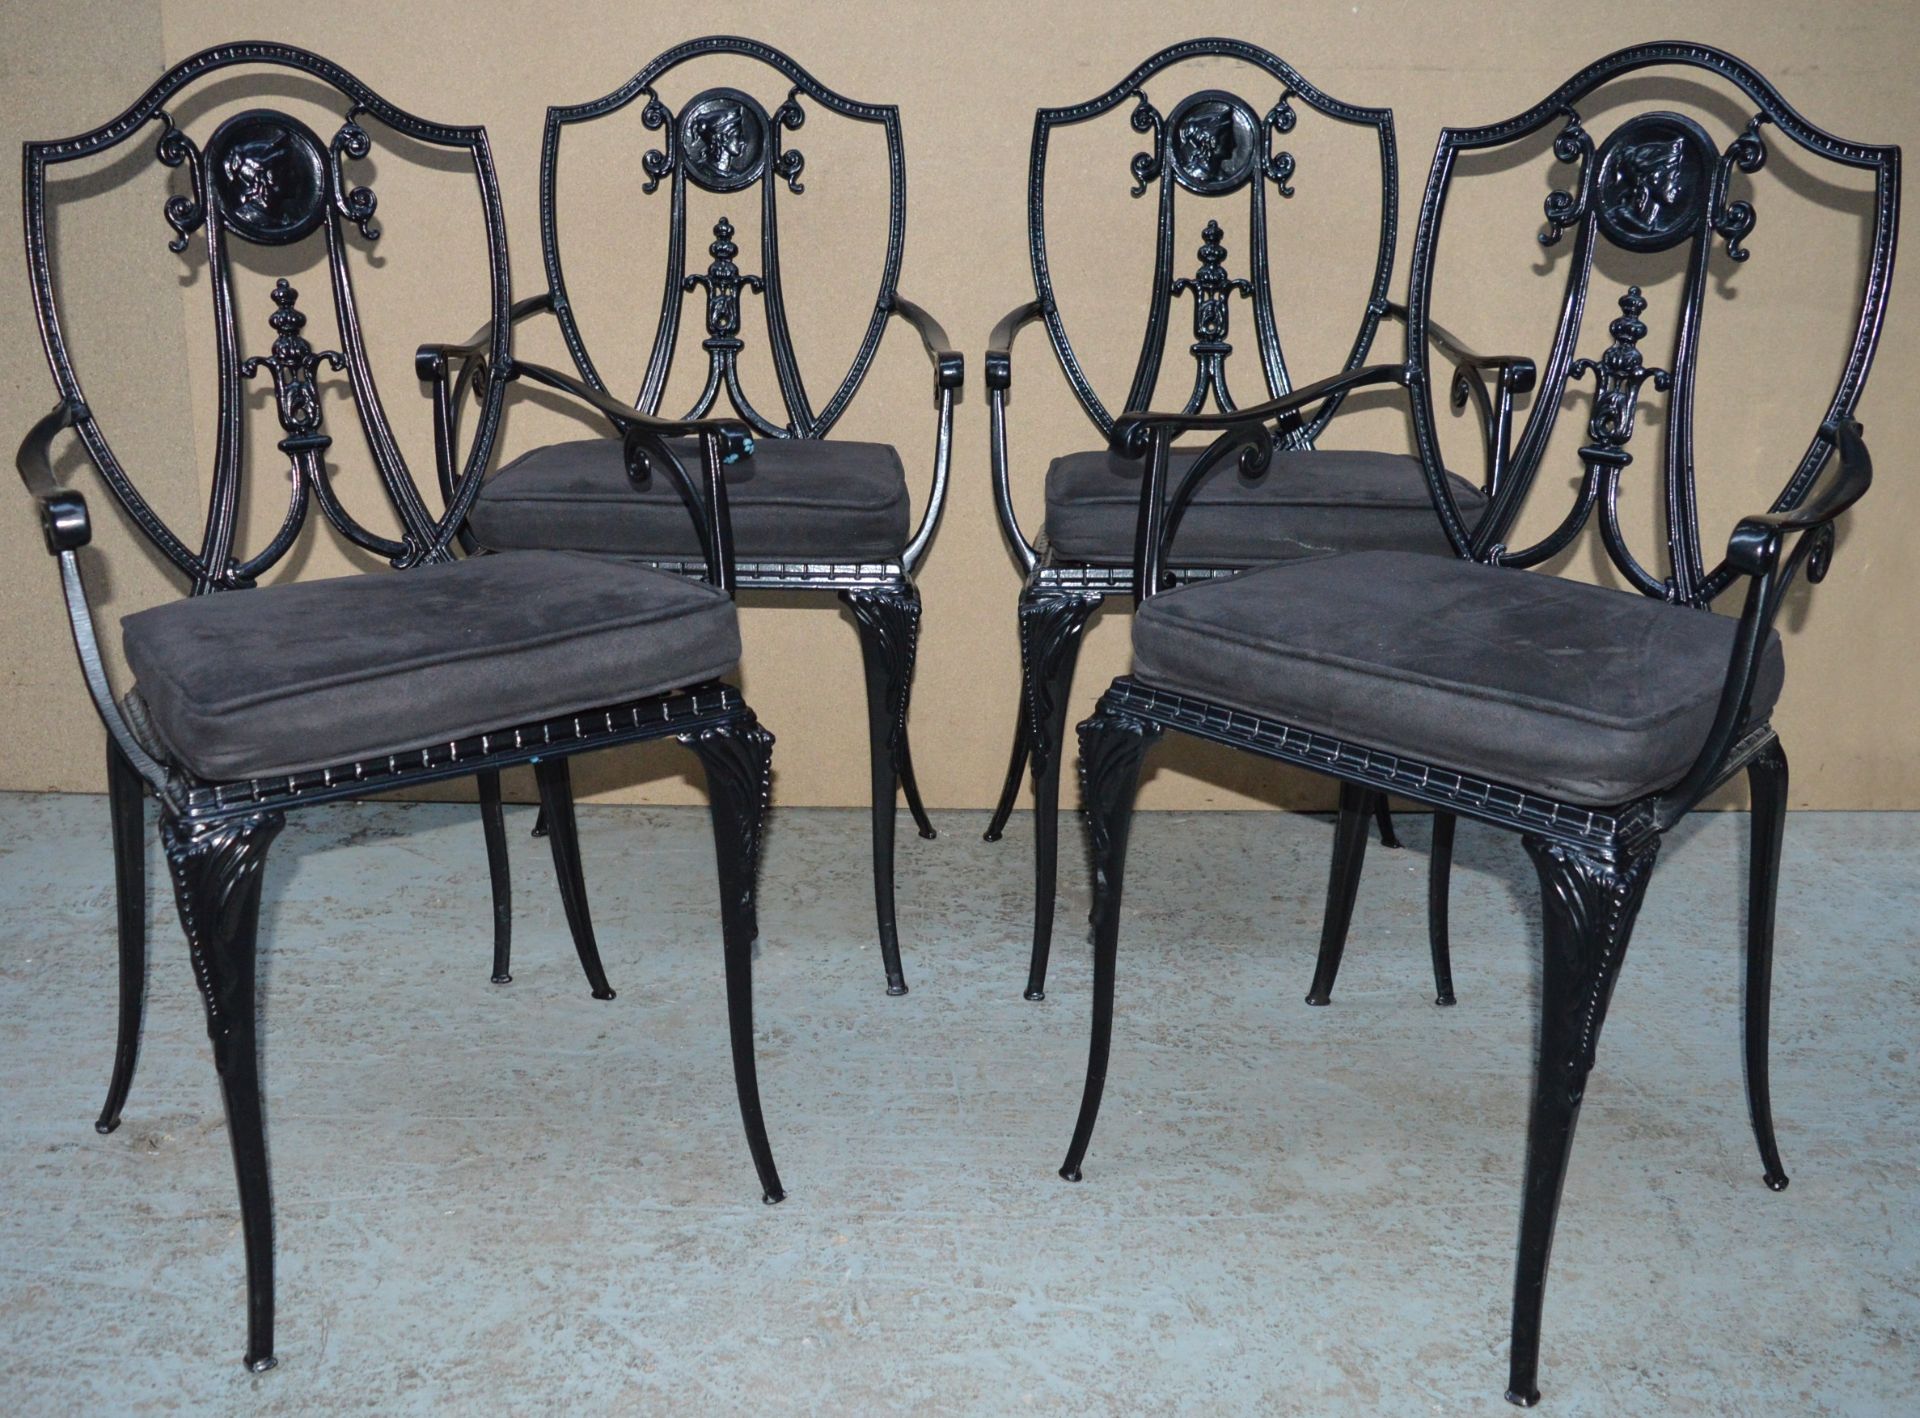 4 x Cast Metal Shield Back Restaurant Chairs - Suitable For Indoor or Outdoor Use - From Famouse - Image 3 of 14